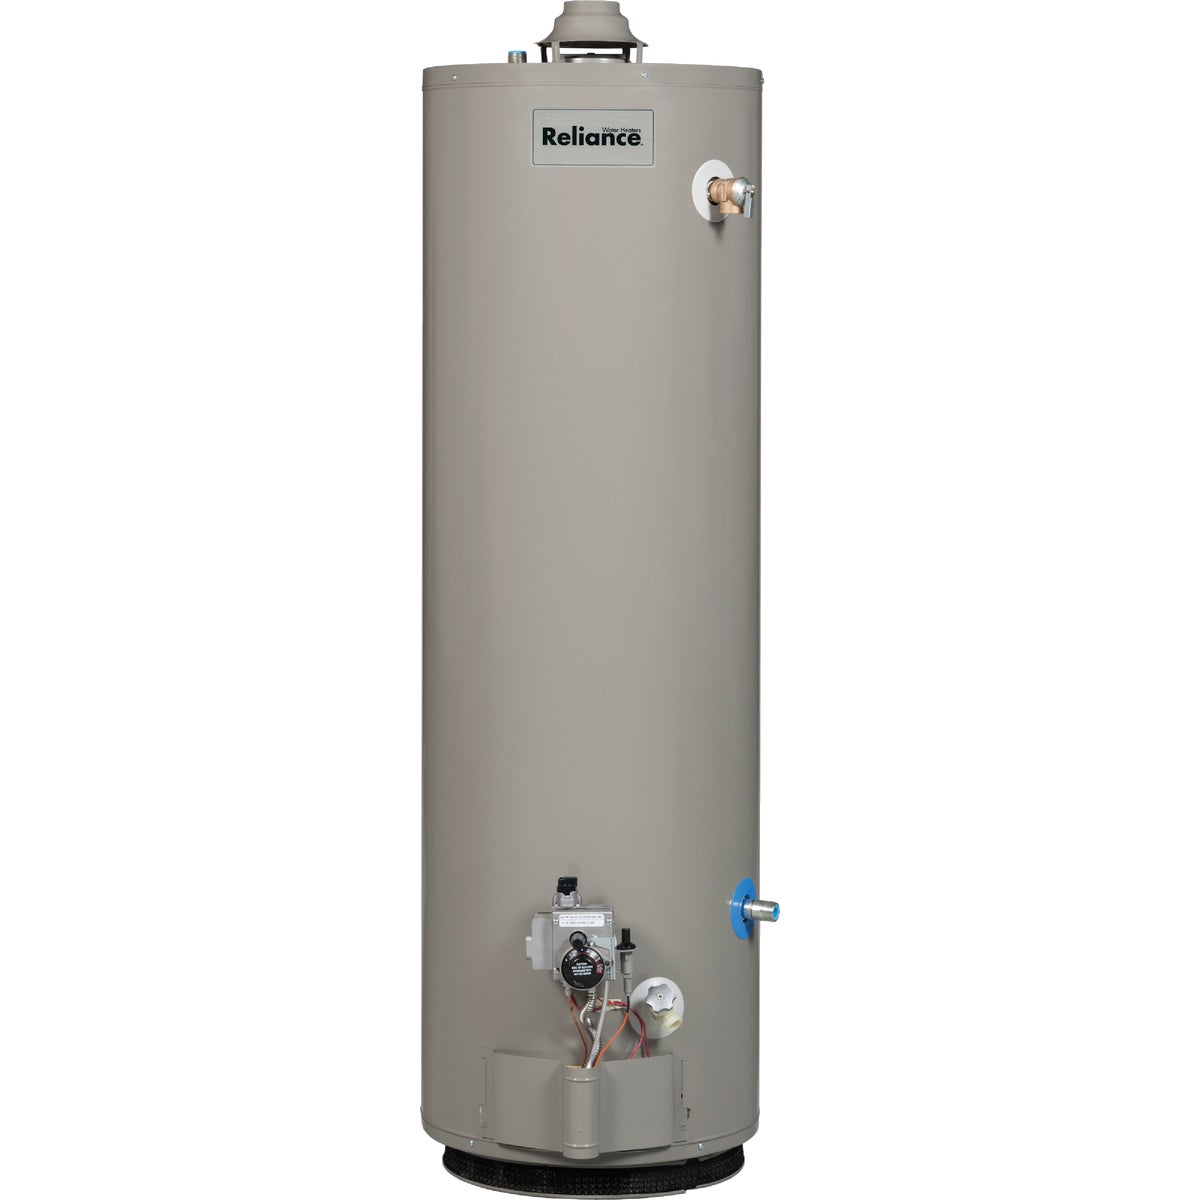 Reliance 30 Gal. Tall 6yr 35,500 BTU Standard Vent Natural Gas/Liquid Propane Water Heater for Mobile Home